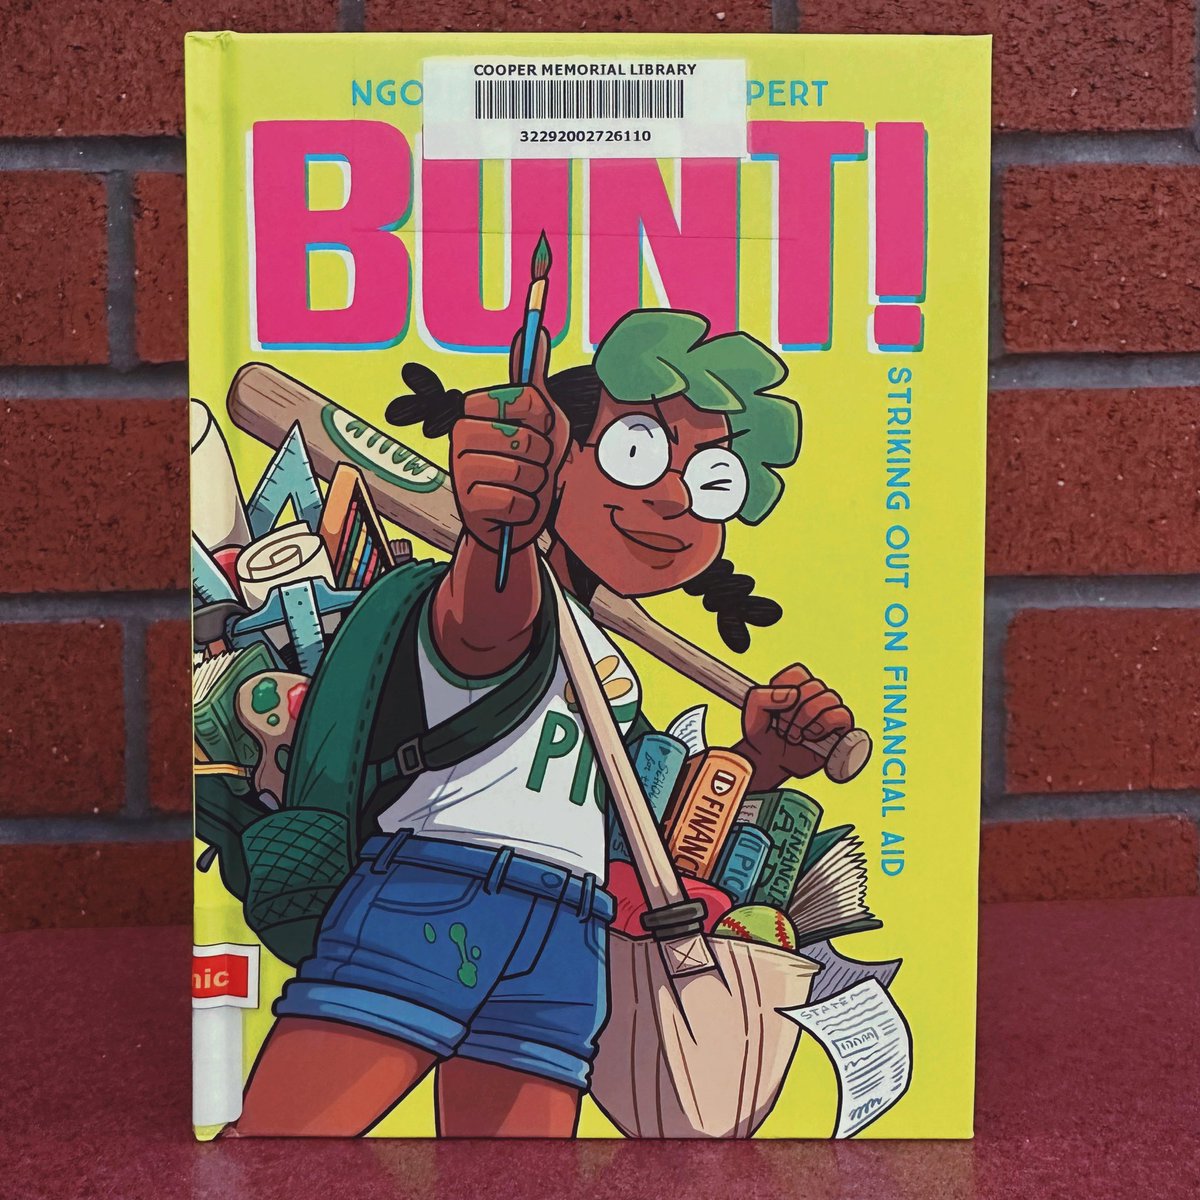 Just finished reading Bunt by @ngoziu & @mad_rupert!! Absolutely FANTASTIC read. Loved Molly’s desire to preserve her town history, the dynamics between the team, & just embracing the weirdness of yourself and others!! Is it cheesy to say it’s a home run of a graphic novel? 🥎